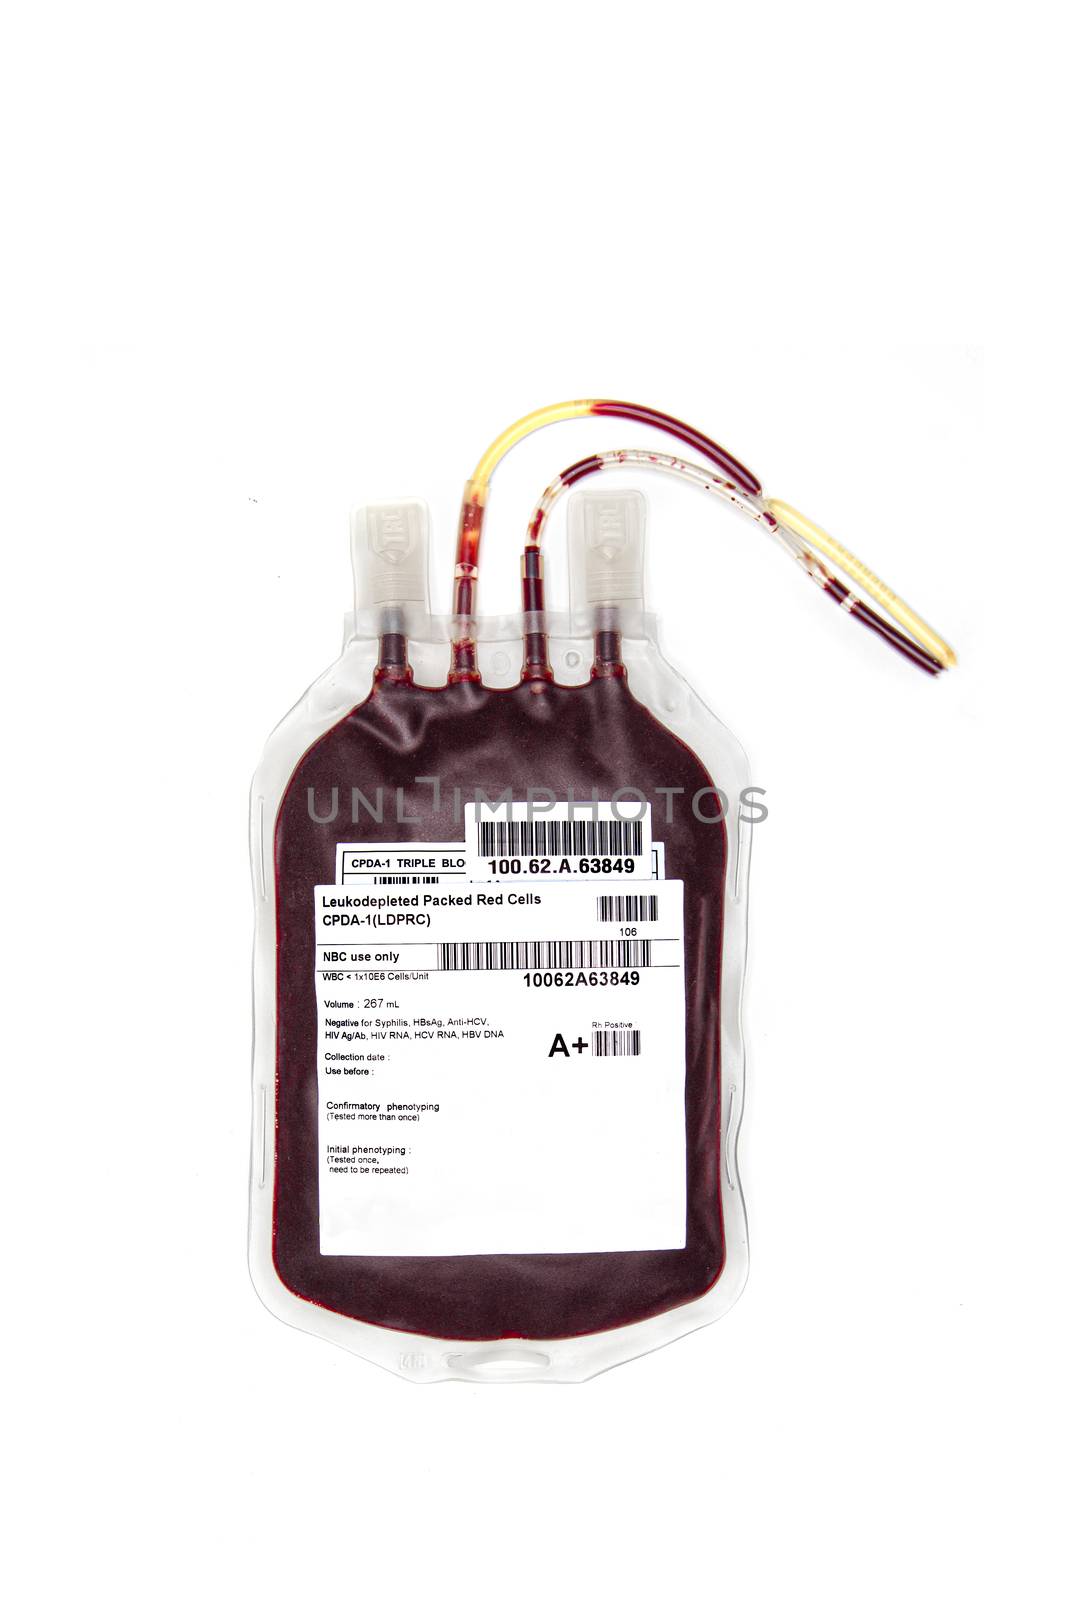 A bag of fresh blood or packed red cell, isolated on white back ground. Blood transfusion.